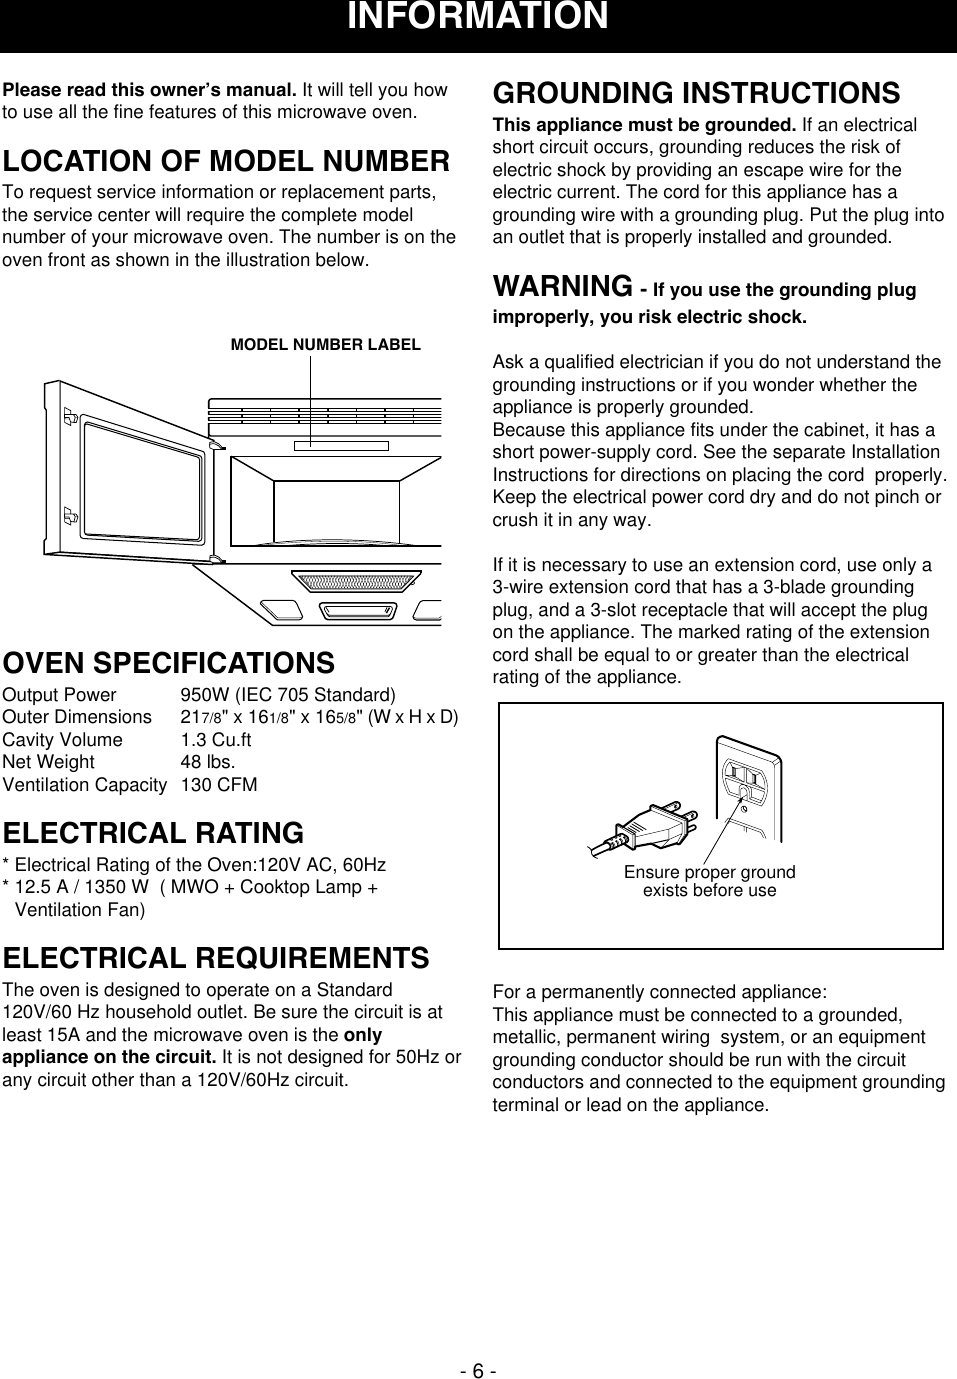 - 6 -Please read this owner’s manual. It will tell you howto use all the fine features of this microwave oven. LOCATION OF MODEL NUMBERTo request service information or replacement parts,the service center will require the complete modelnumber of your microwave oven. The number is on theoven front as shown in the illustration below.OVEN SPECIFICATIONSOutput Power 950W (IEC 705 Standard)Outer Dimensions 217/8&quot; x 161/8&quot; x 165/8&quot; (W x H x D)Cavity Volume  1.3 Cu.ftNet Weight 48 lbs.Ventilation Capacity 130 CFMELECTRICAL RATING* Electrical Rating of the Oven:120V AC, 60Hz* 12.5 A / 1350 W  ( MWO + Cooktop Lamp +Ventilation Fan)ELECTRICAL REQUIREMENTSThe oven is designed to operate on a Standard120V/60 Hz household outlet. Be sure the circuit is atleast 15A and the microwave oven is the onlyappliance on the circuit. It is not designed for 50Hz orany circuit other than a 120V/60Hz circuit.GROUNDING INSTRUCTIONSThis appliance must be grounded. If an electricalshort circuit occurs, grounding reduces the risk ofelectric shock by providing an escape wire for theelectric current. The cord for this appliance has agrounding wire with a grounding plug. Put the plug intoan outlet that is properly installed and grounded.WARNING - If you use the grounding plugimproperly, you risk electric shock.Ask a qualified electrician if you do not understand thegrounding instructions or if you wonder whether theappliance is properly grounded.Because this appliance fits under the cabinet, it has ashort power-supply cord. See the separate InstallationInstructions for directions on placing the cord  properly.Keep the electrical power cord dry and do not pinch orcrush it in any way.If it is necessary to use an extension cord, use only a3-wire extension cord that has a 3-blade groundingplug, and a 3-slot receptacle that will accept the plugon the appliance. The marked rating of the extensioncord shall be equal to or greater than the electricalrating of the appliance.For a permanently connected appliance:This appliance must be connected to a grounded,metallic, permanent wiring  system, or an equipmentgrounding conductor should be run with the circuitconductors and connected to the equipment groundingterminal or lead on the appliance.Ensure proper groundexists before useMODEL NUMBER LABELINFORMATION